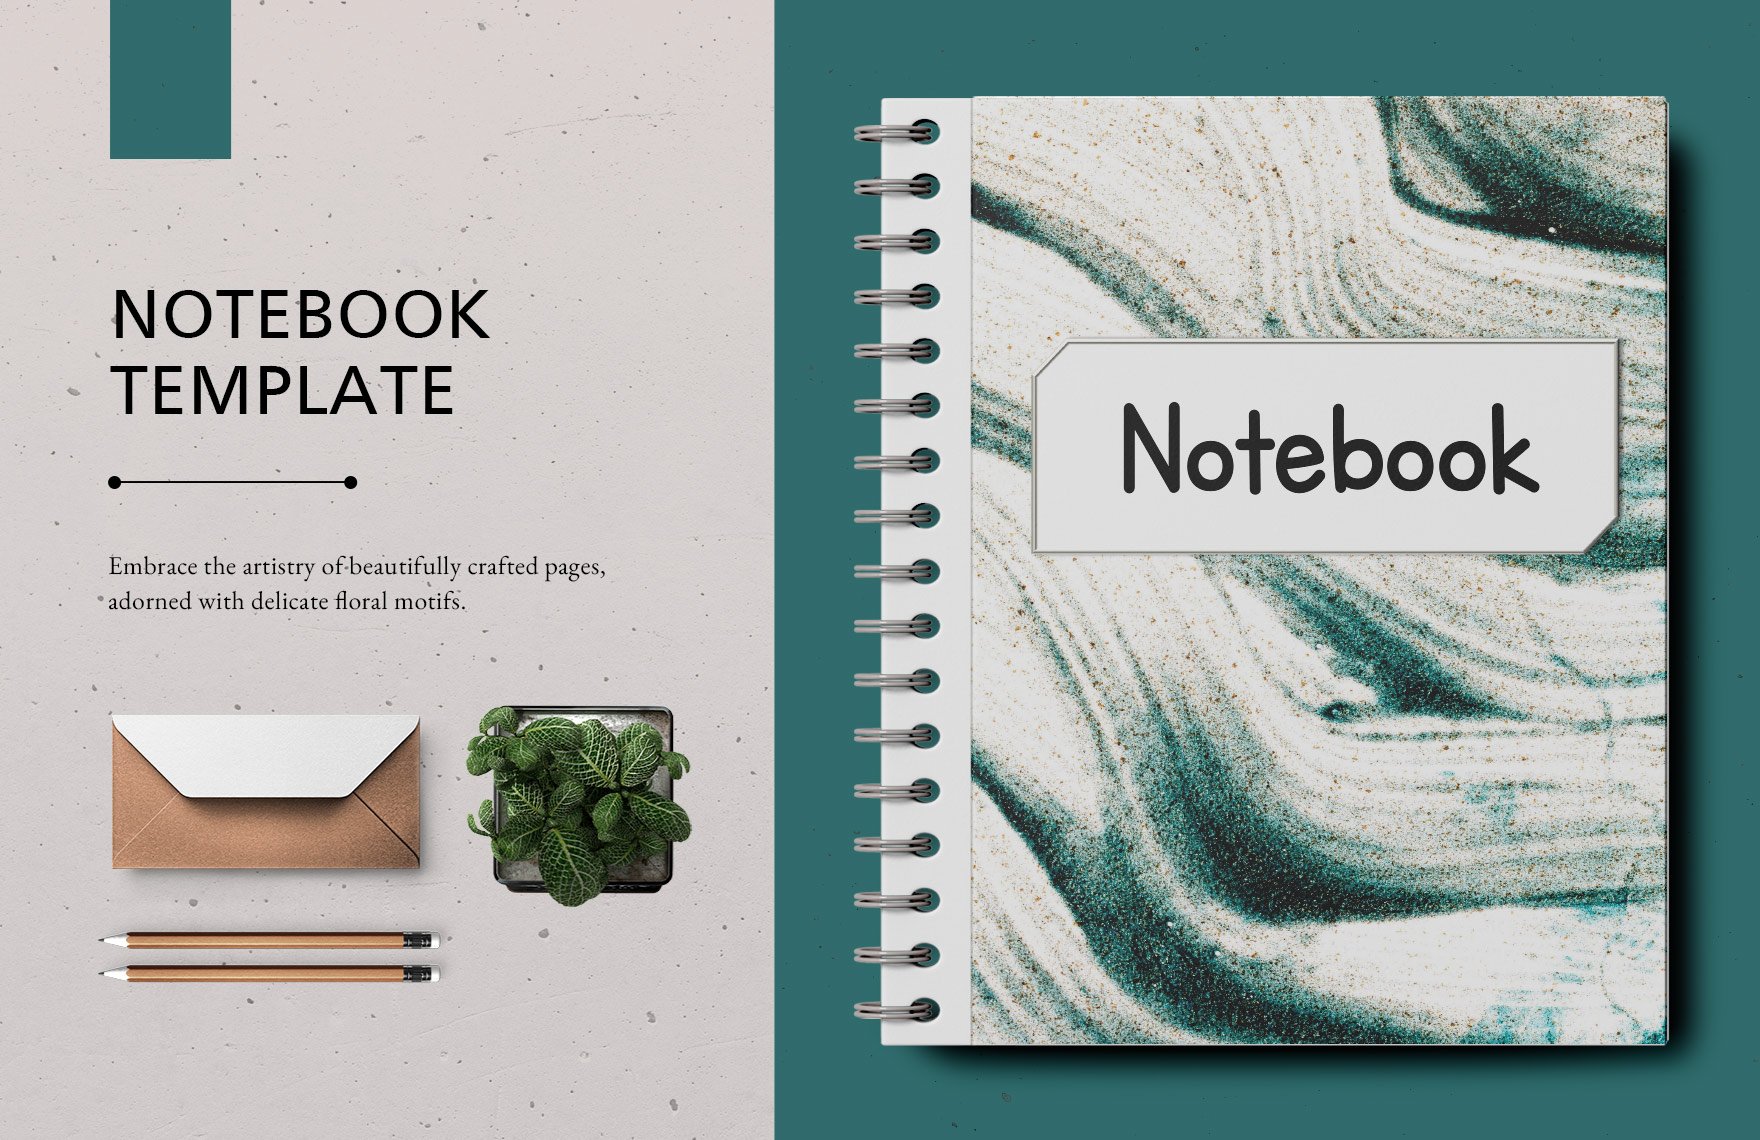 FREE Notebook Template Download in Word, Google Docs, PDF